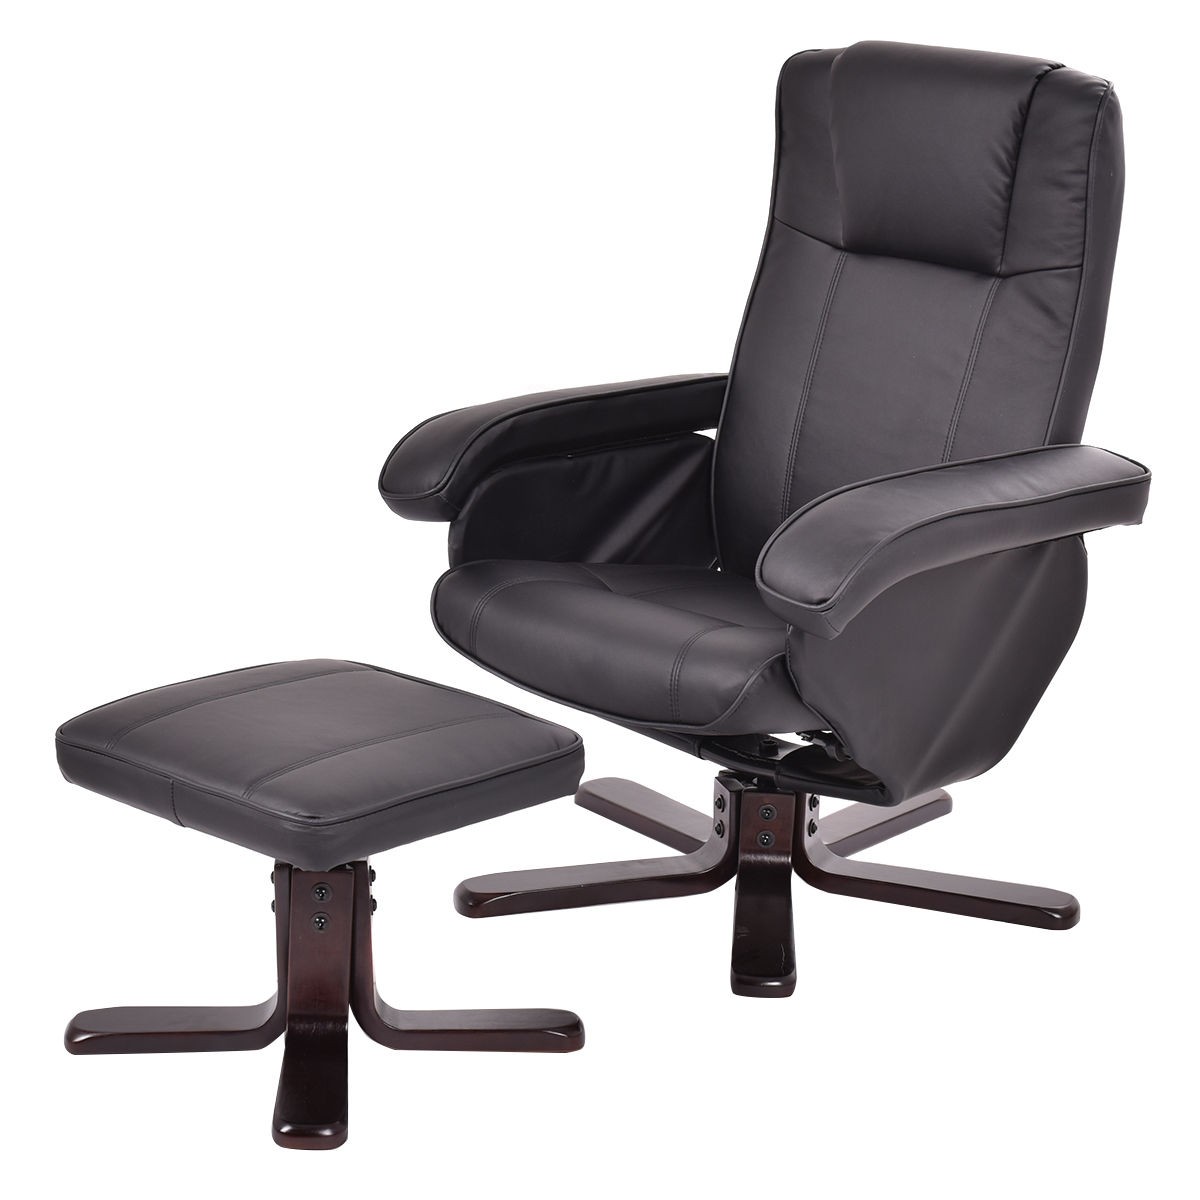 PU Leather Executive Chair Leisure Recliner Swivel ...